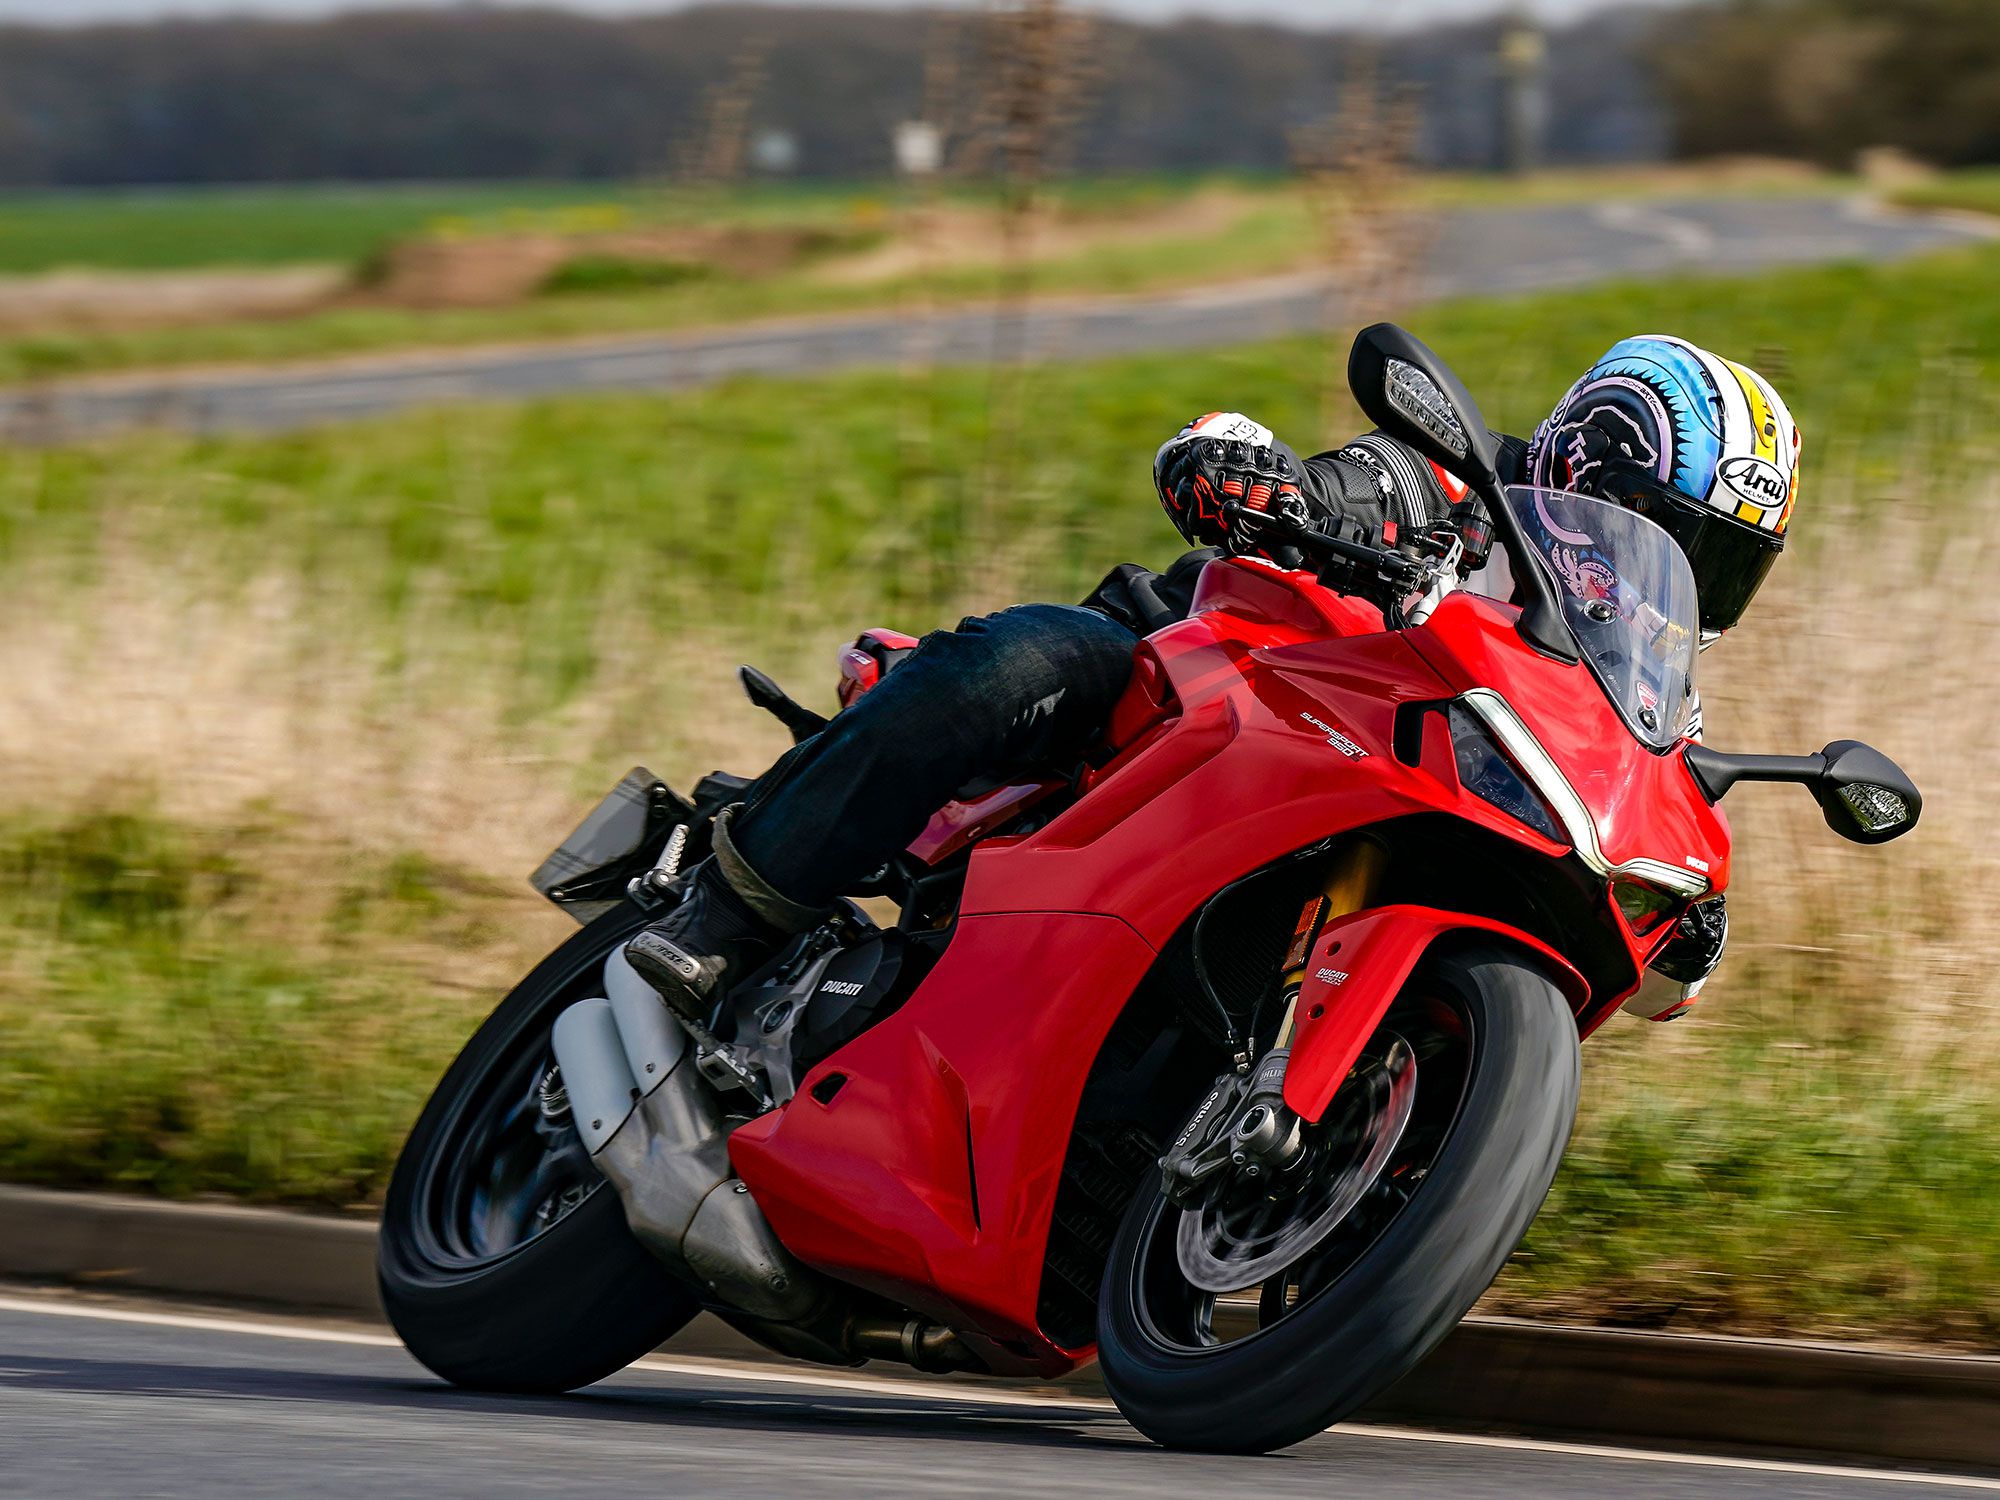 The SuperSport offers a sensible, softer alternative to those who loved Ducati styling, who possibly wanted a Panigale but rationally sought something more real world: an attractive road bike that wasn’t going to break the bank balance but was still capable, even on the track.